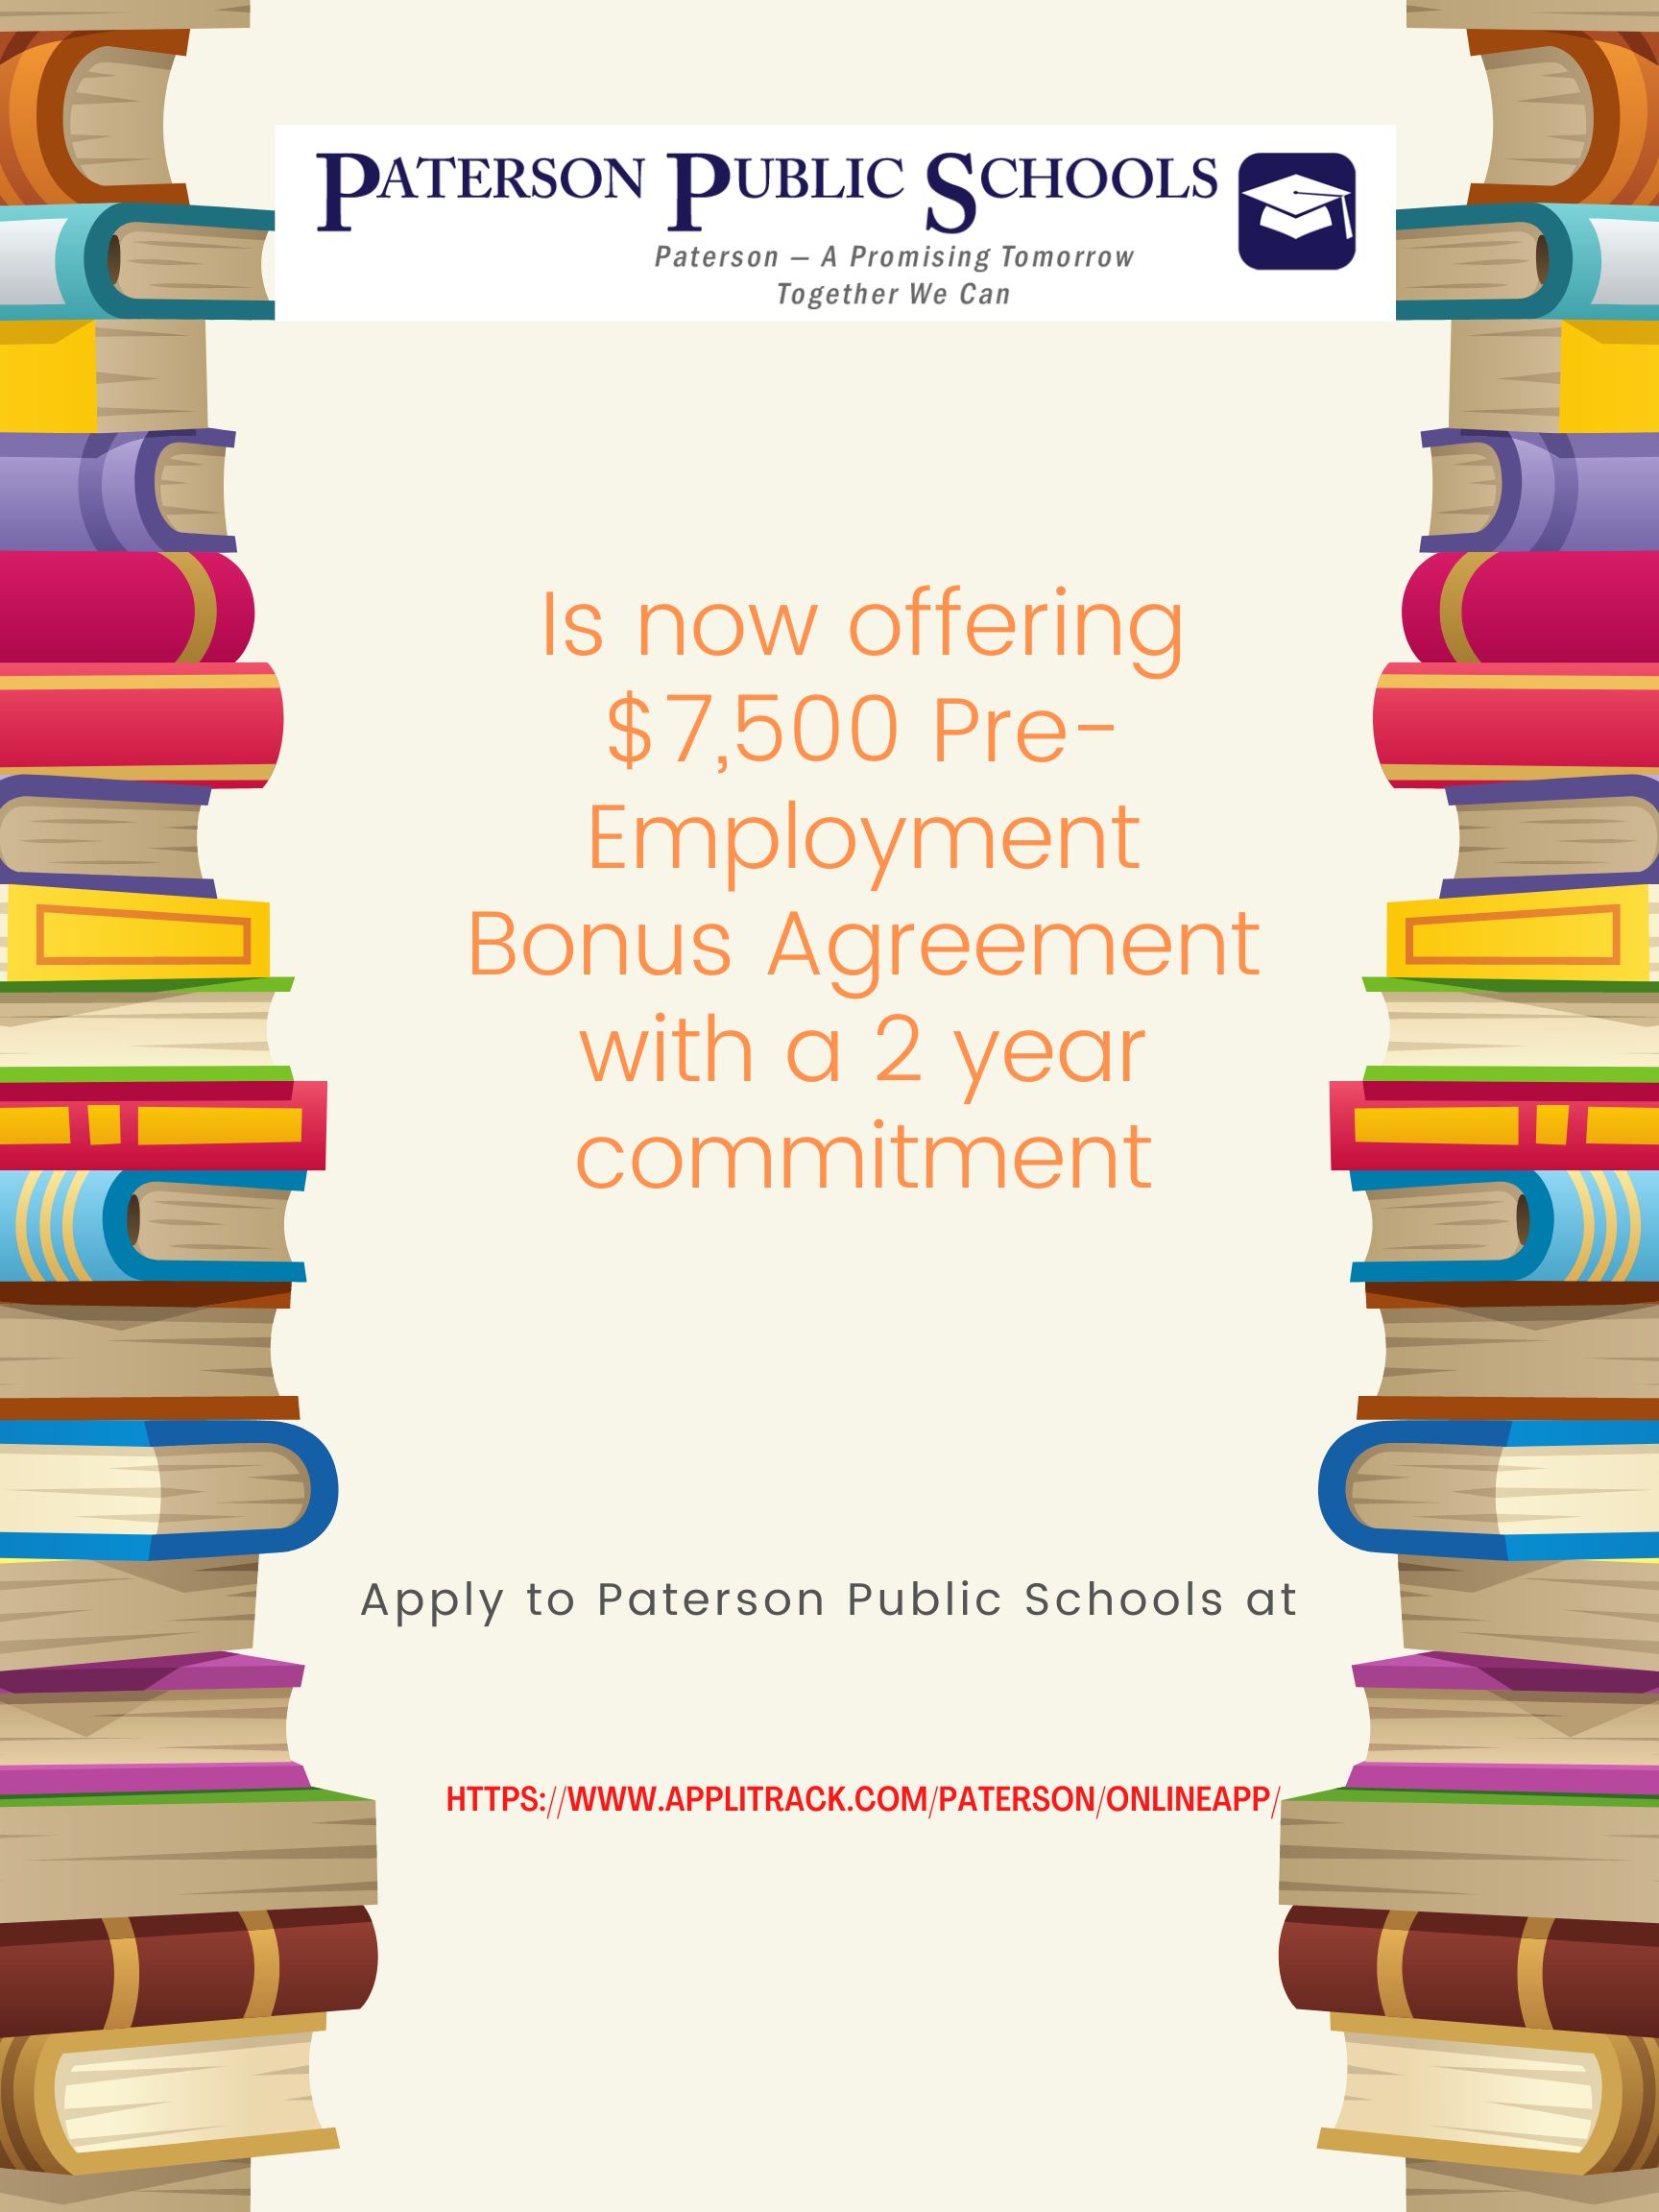 Is now offering $7,500 pre-employment Bonus Agreement with a 2 year commitment. Click to apply.